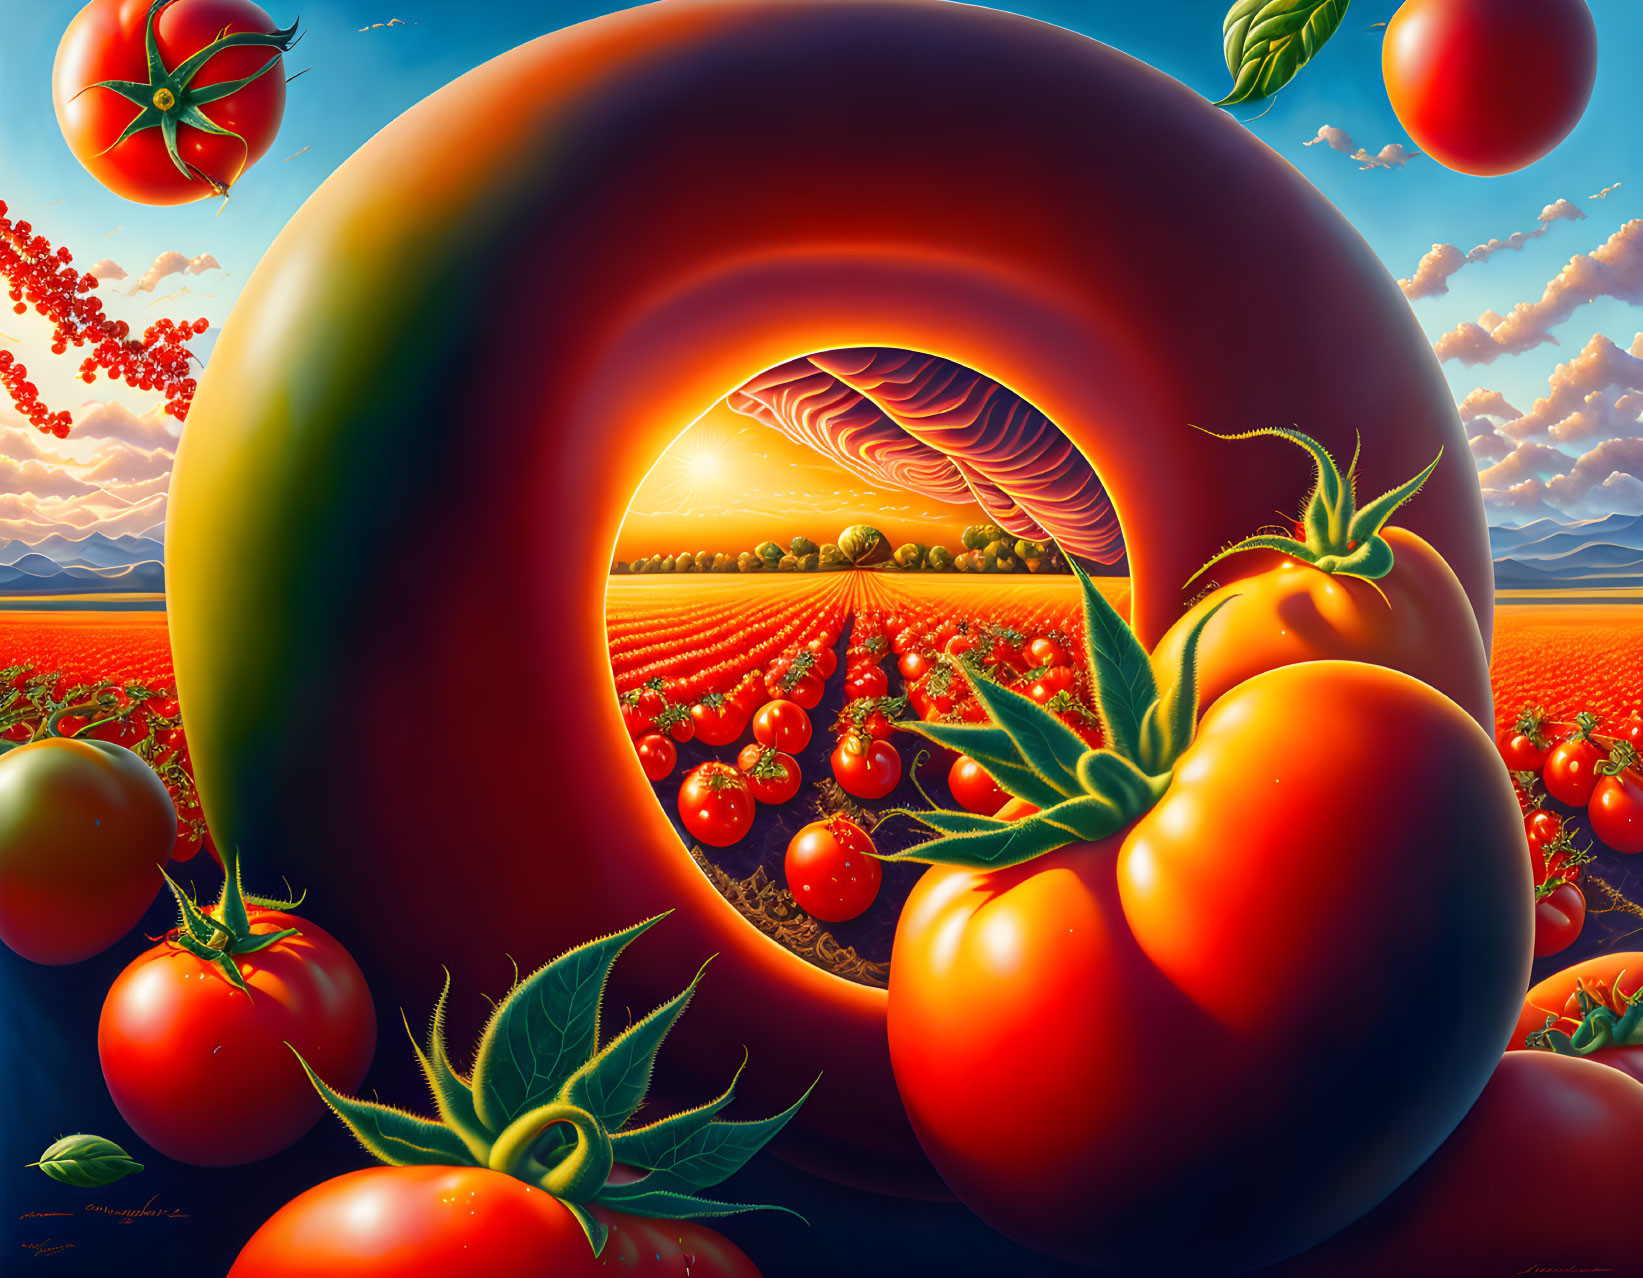 Surreal artwork featuring giant tomato arch, floating tomatoes, and vibrant sky